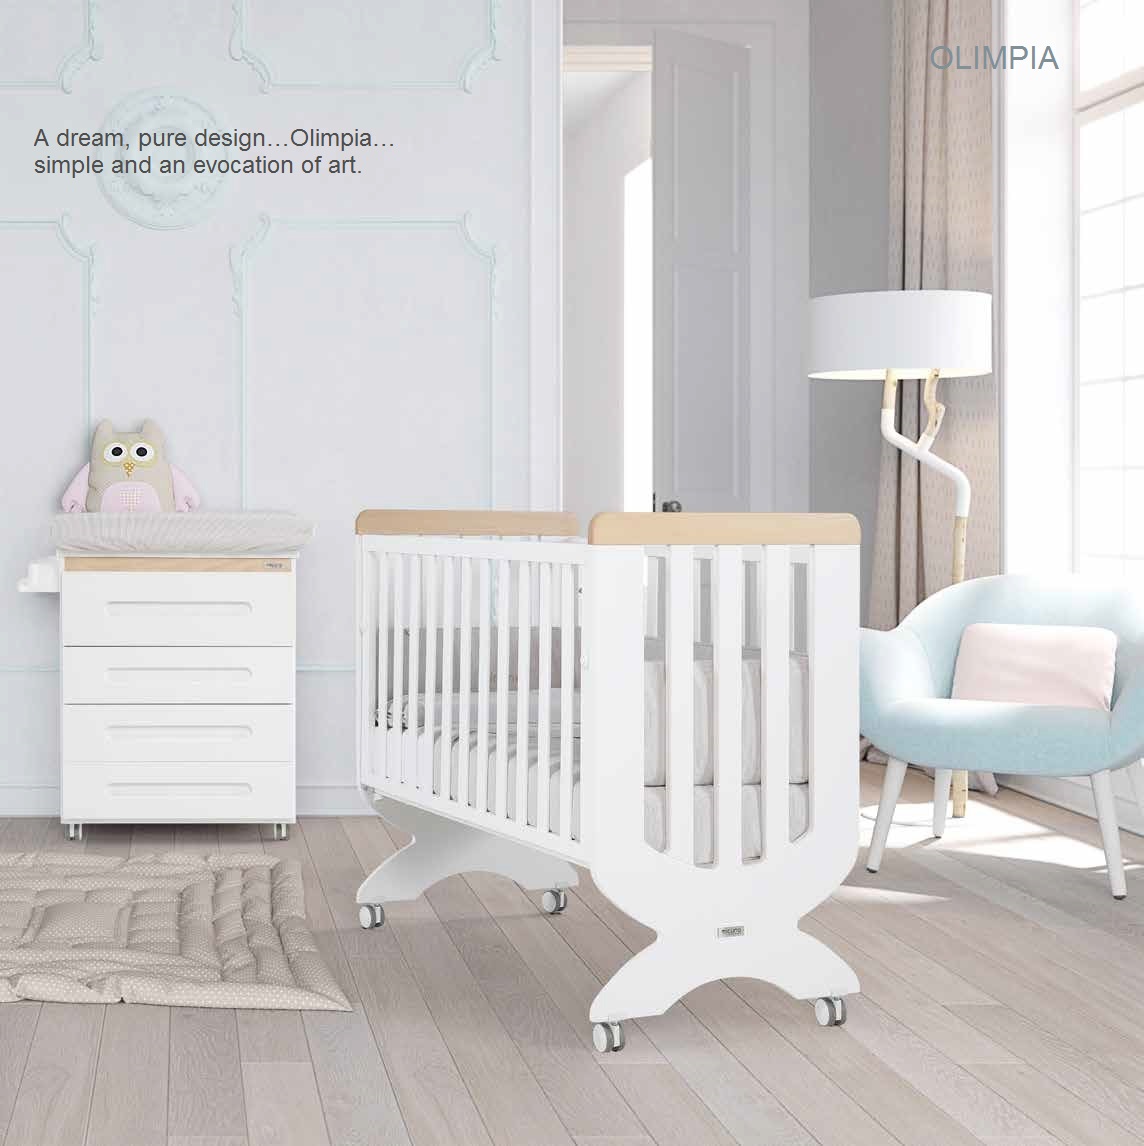 Micuna Olimpia Baby Cot with Patented Relax System + 4 Inch Anti Dust Mite foam Mattress (Unique Double Locking Mechanism for Extra Safety) (Made in SPAIN)